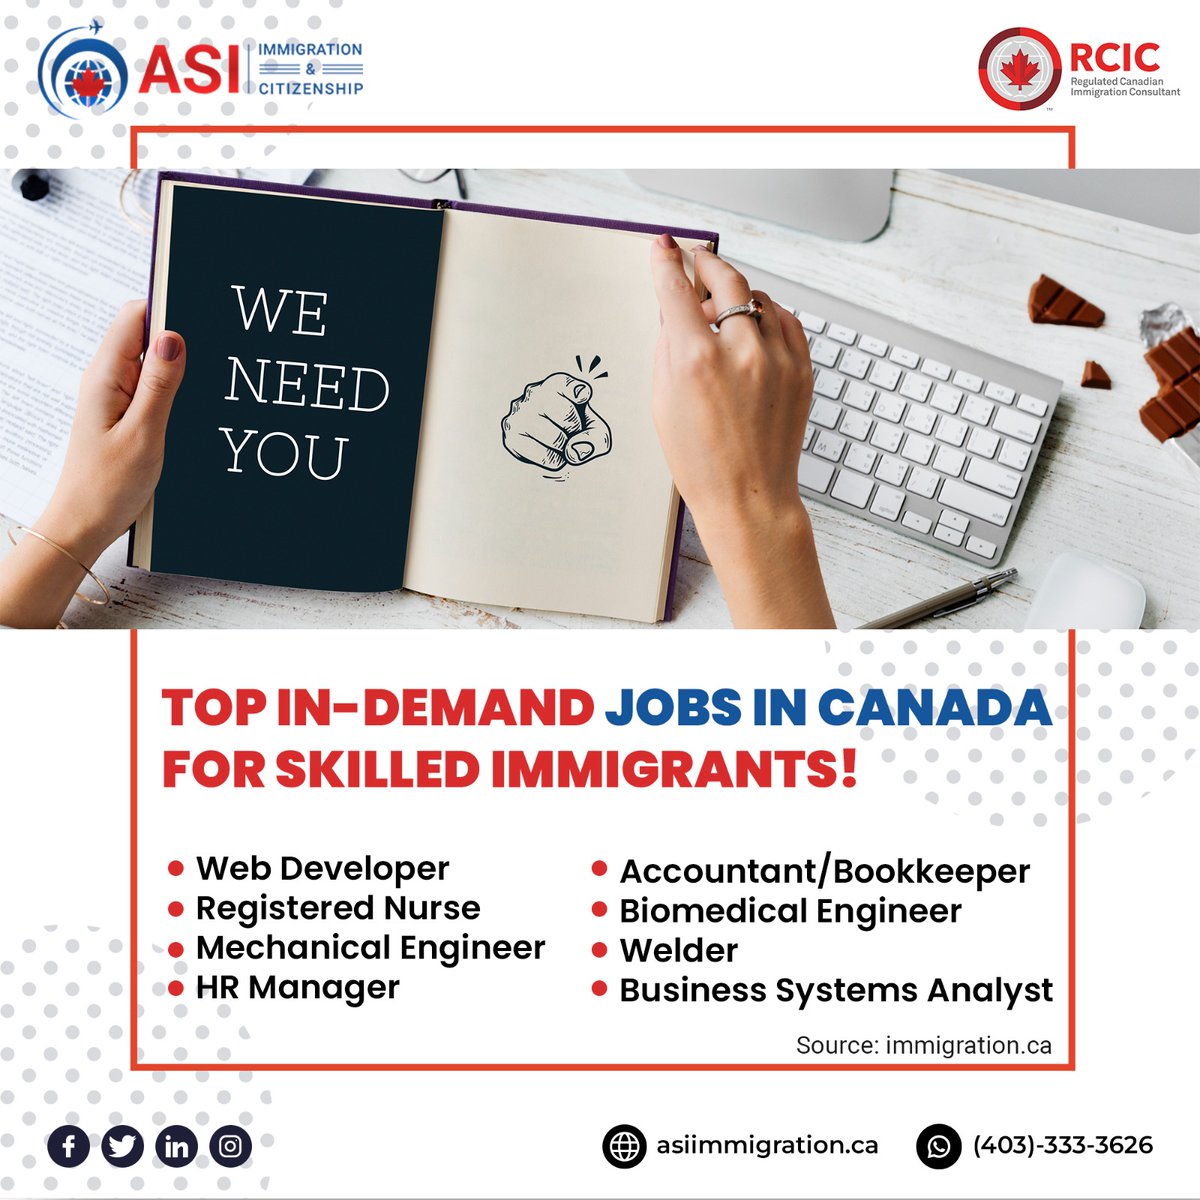 Are you a skilled immigrant? Here are the top jobs you can get in Canada. Let us help you with the immigration process!
asiimmigration.ca/immigration-se…
#jobsincanada #skilledimmigrants #immigrationtocanada #workincanada #workpermit #skilledimmigration #canadianjobs #webdeveloper